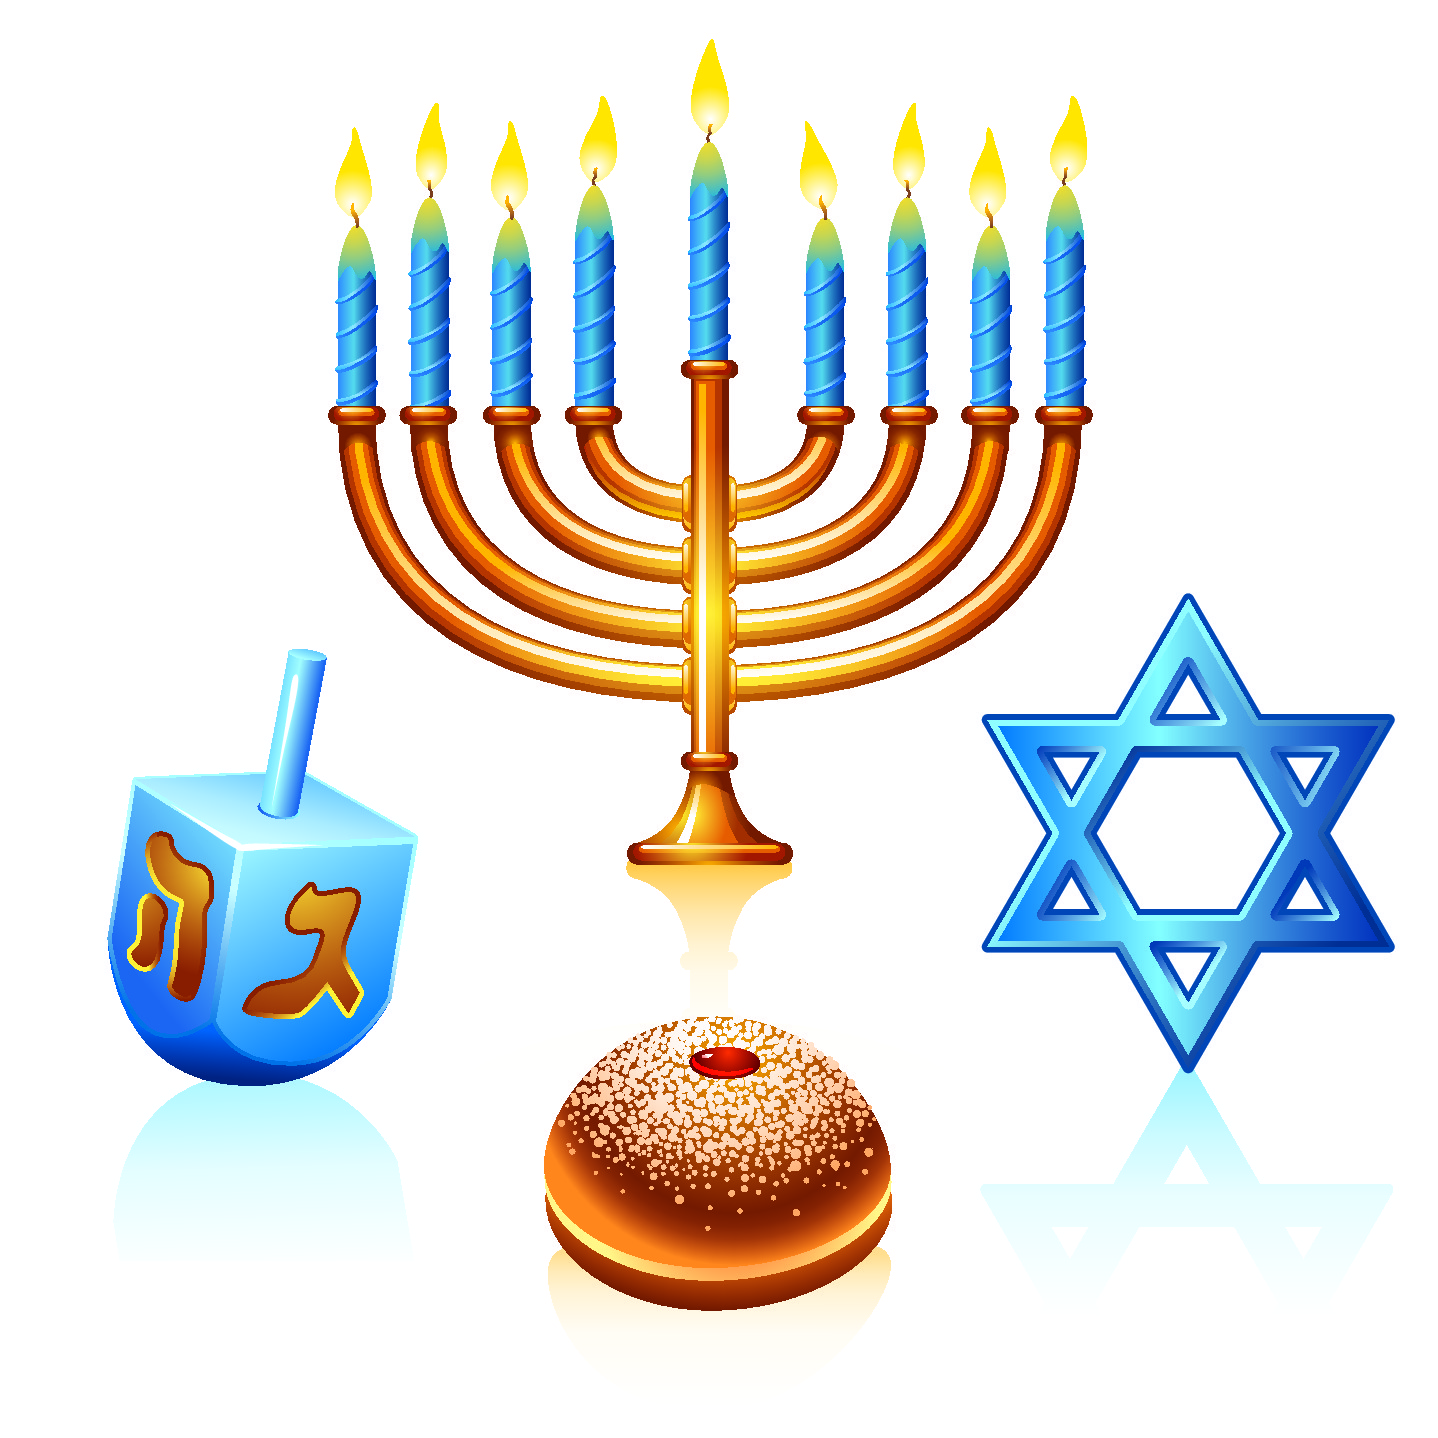 Clip Arts Related To : last day of hanukkah 2019. 